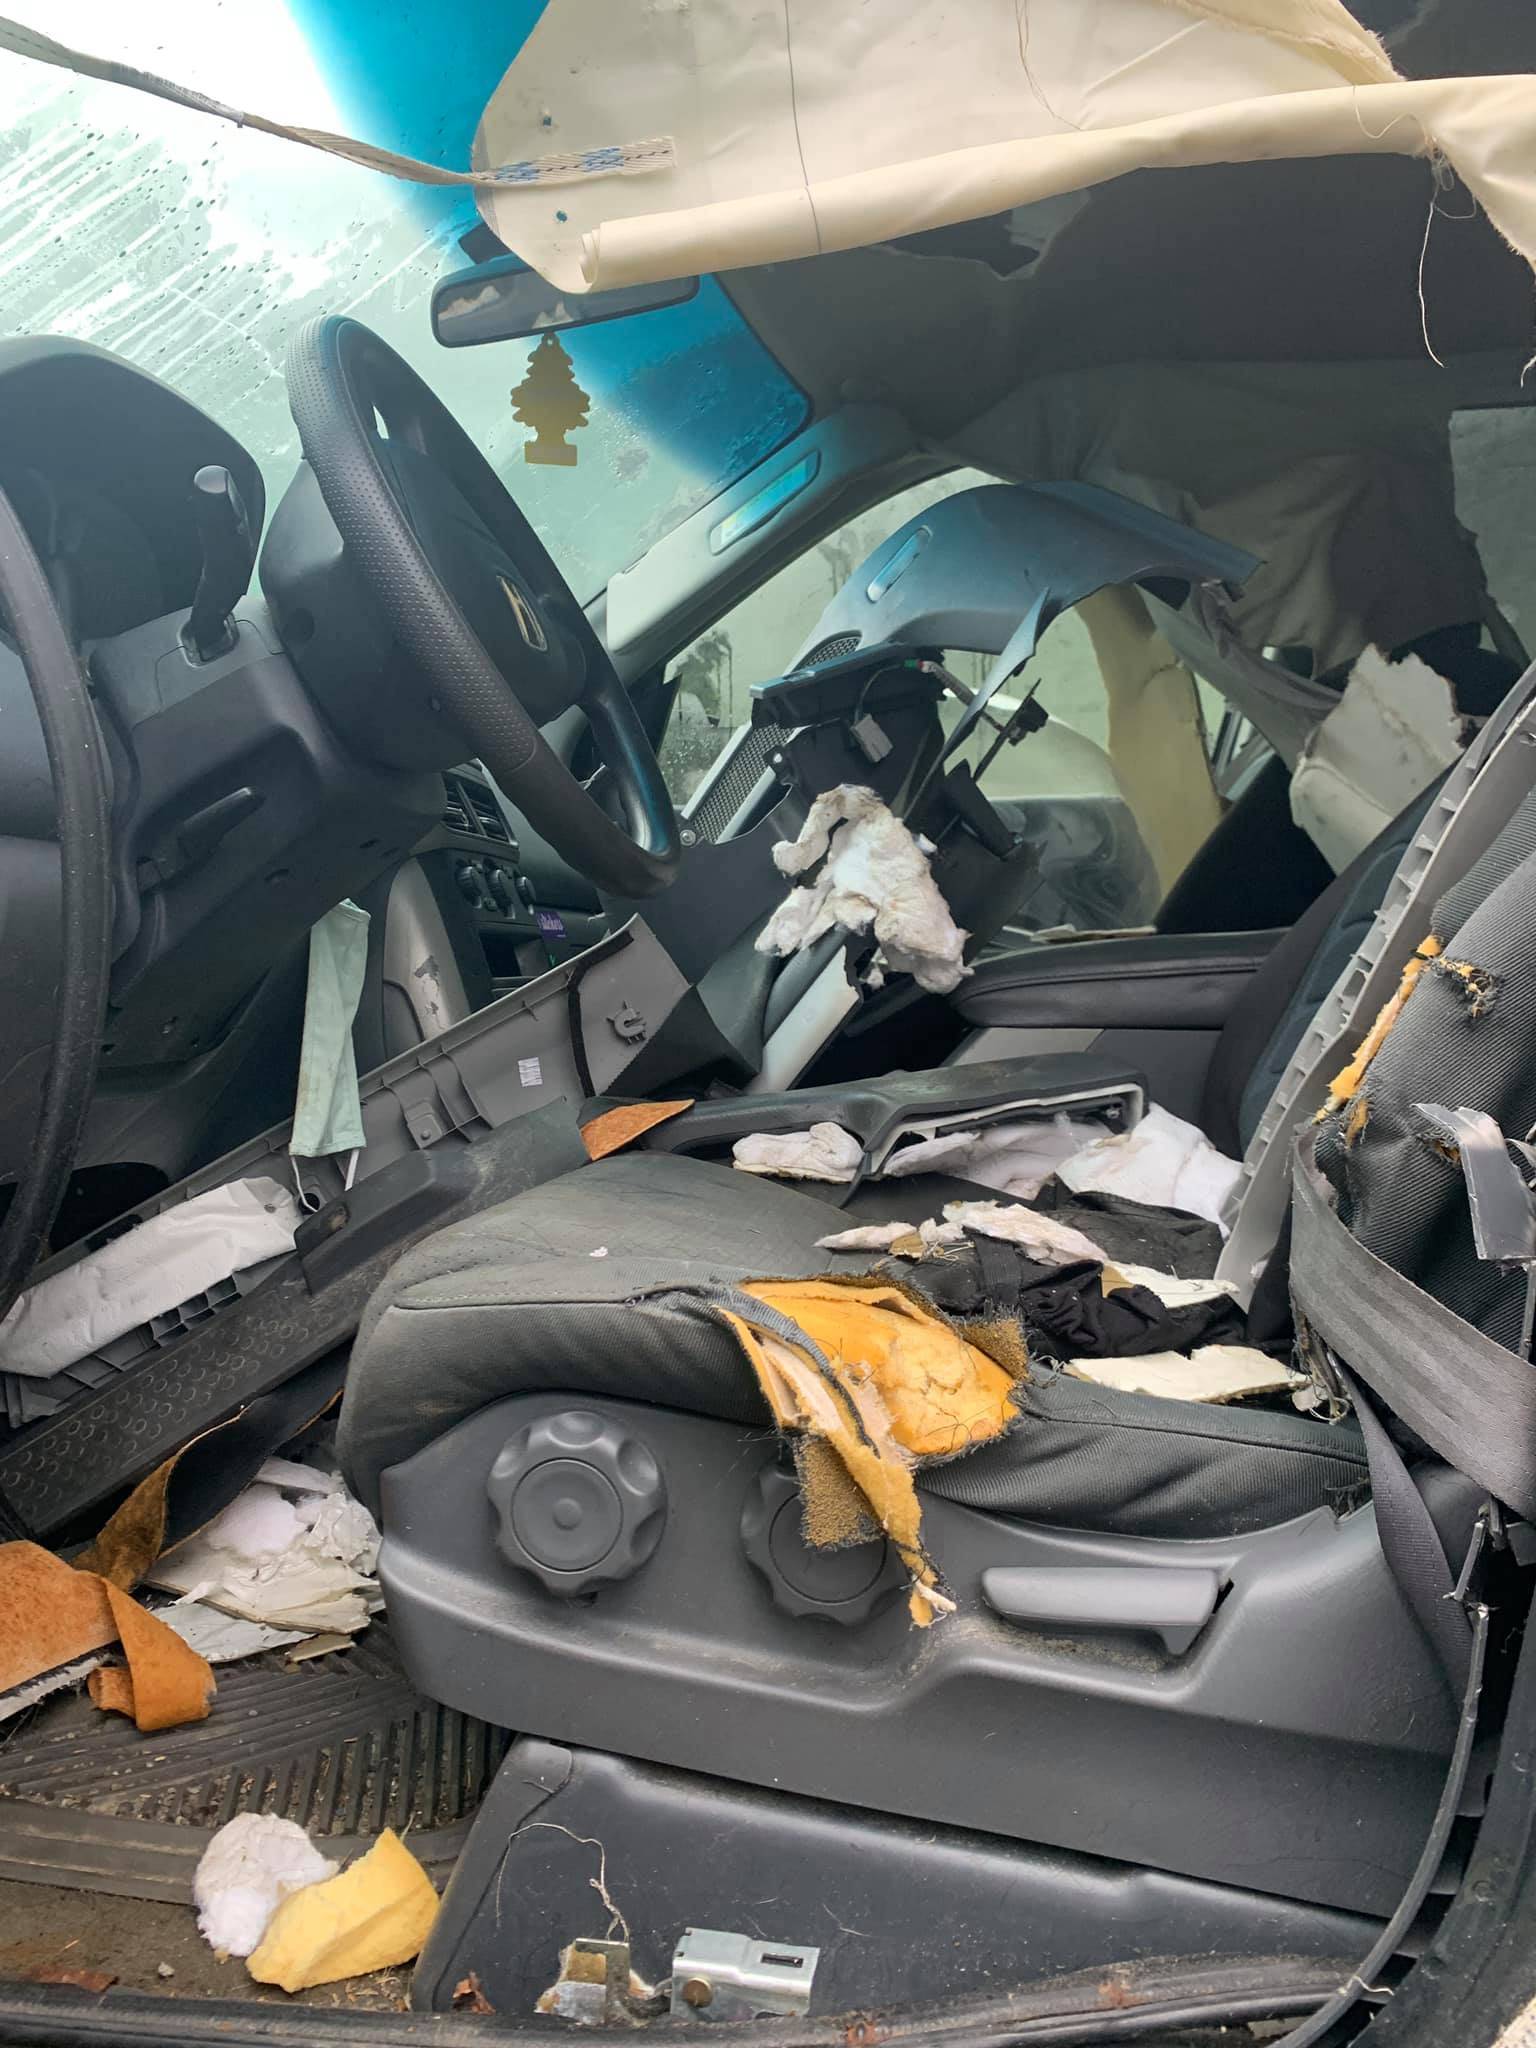 A bear broke into a pizza delivery car Friday morning, chasing the scent. (Courtesy photo / Juneau Pizza)